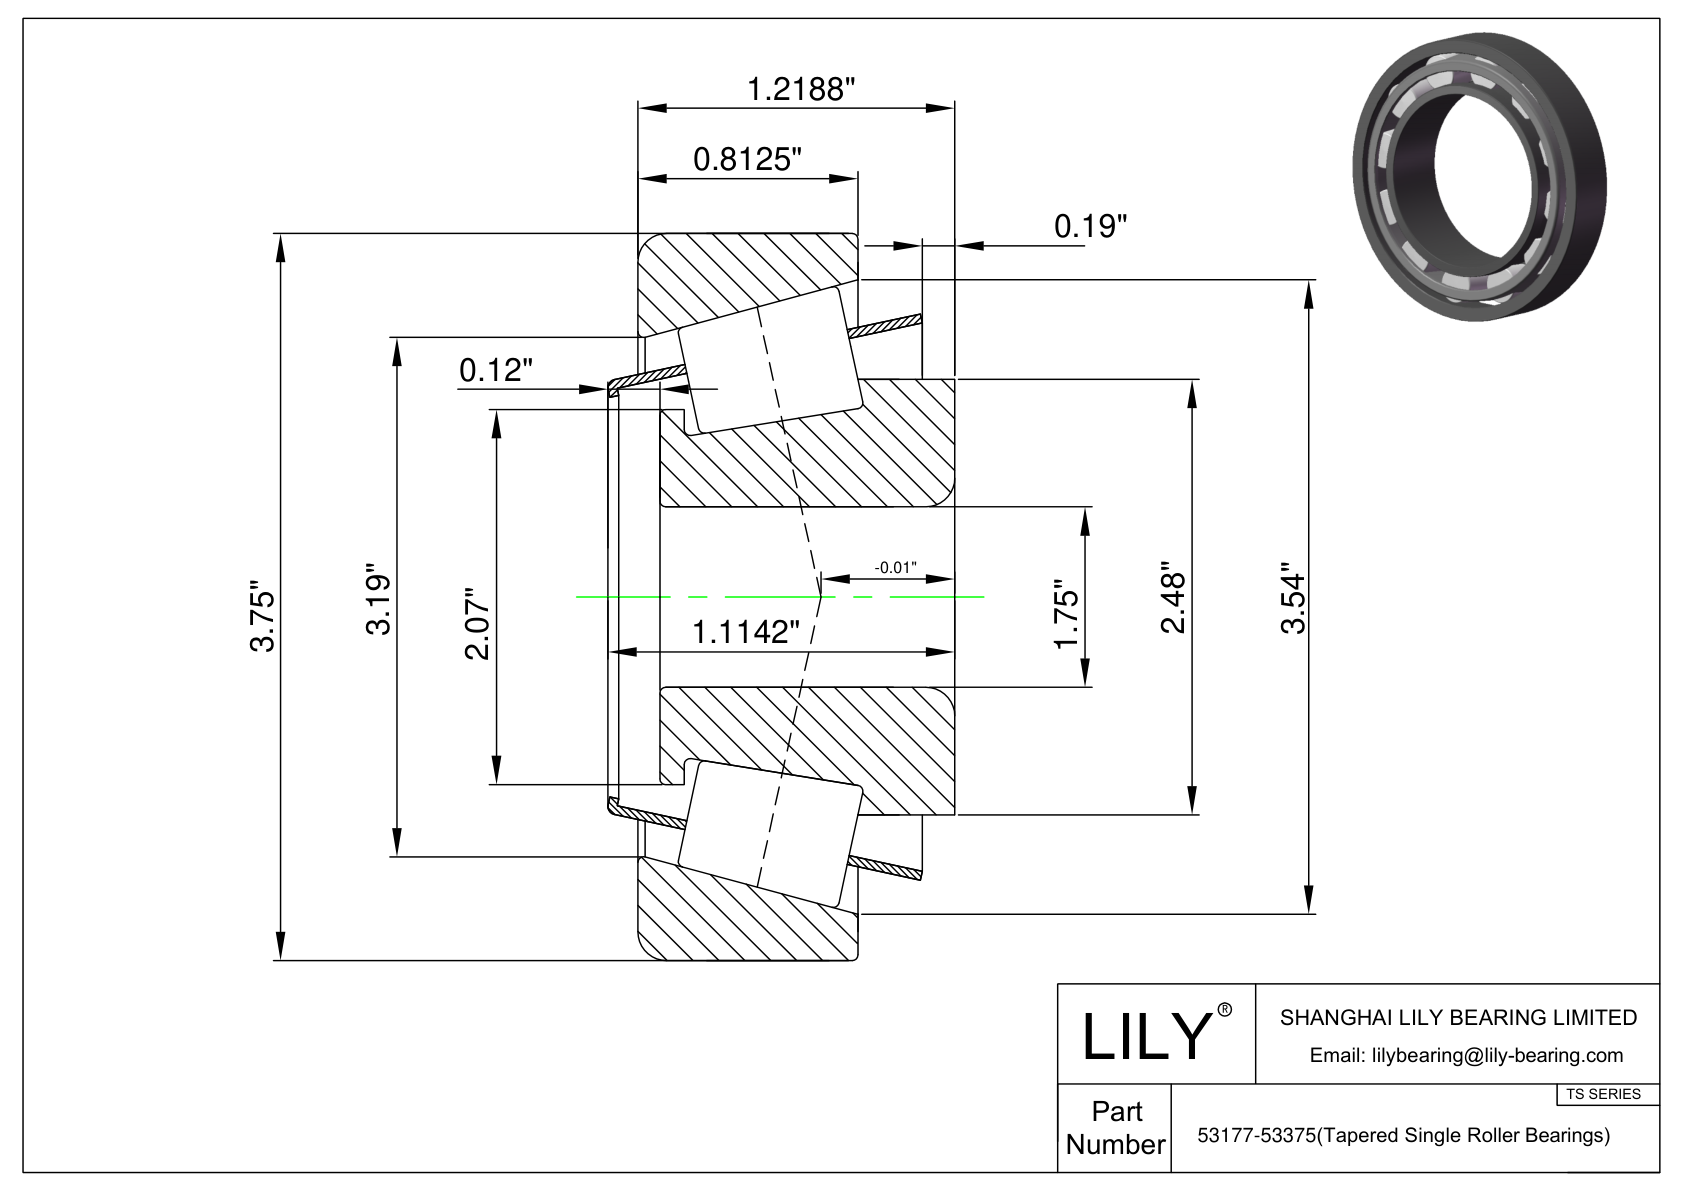 53177-53375 TS (Tapered Single Roller Bearings) (Imperial) cad drawing